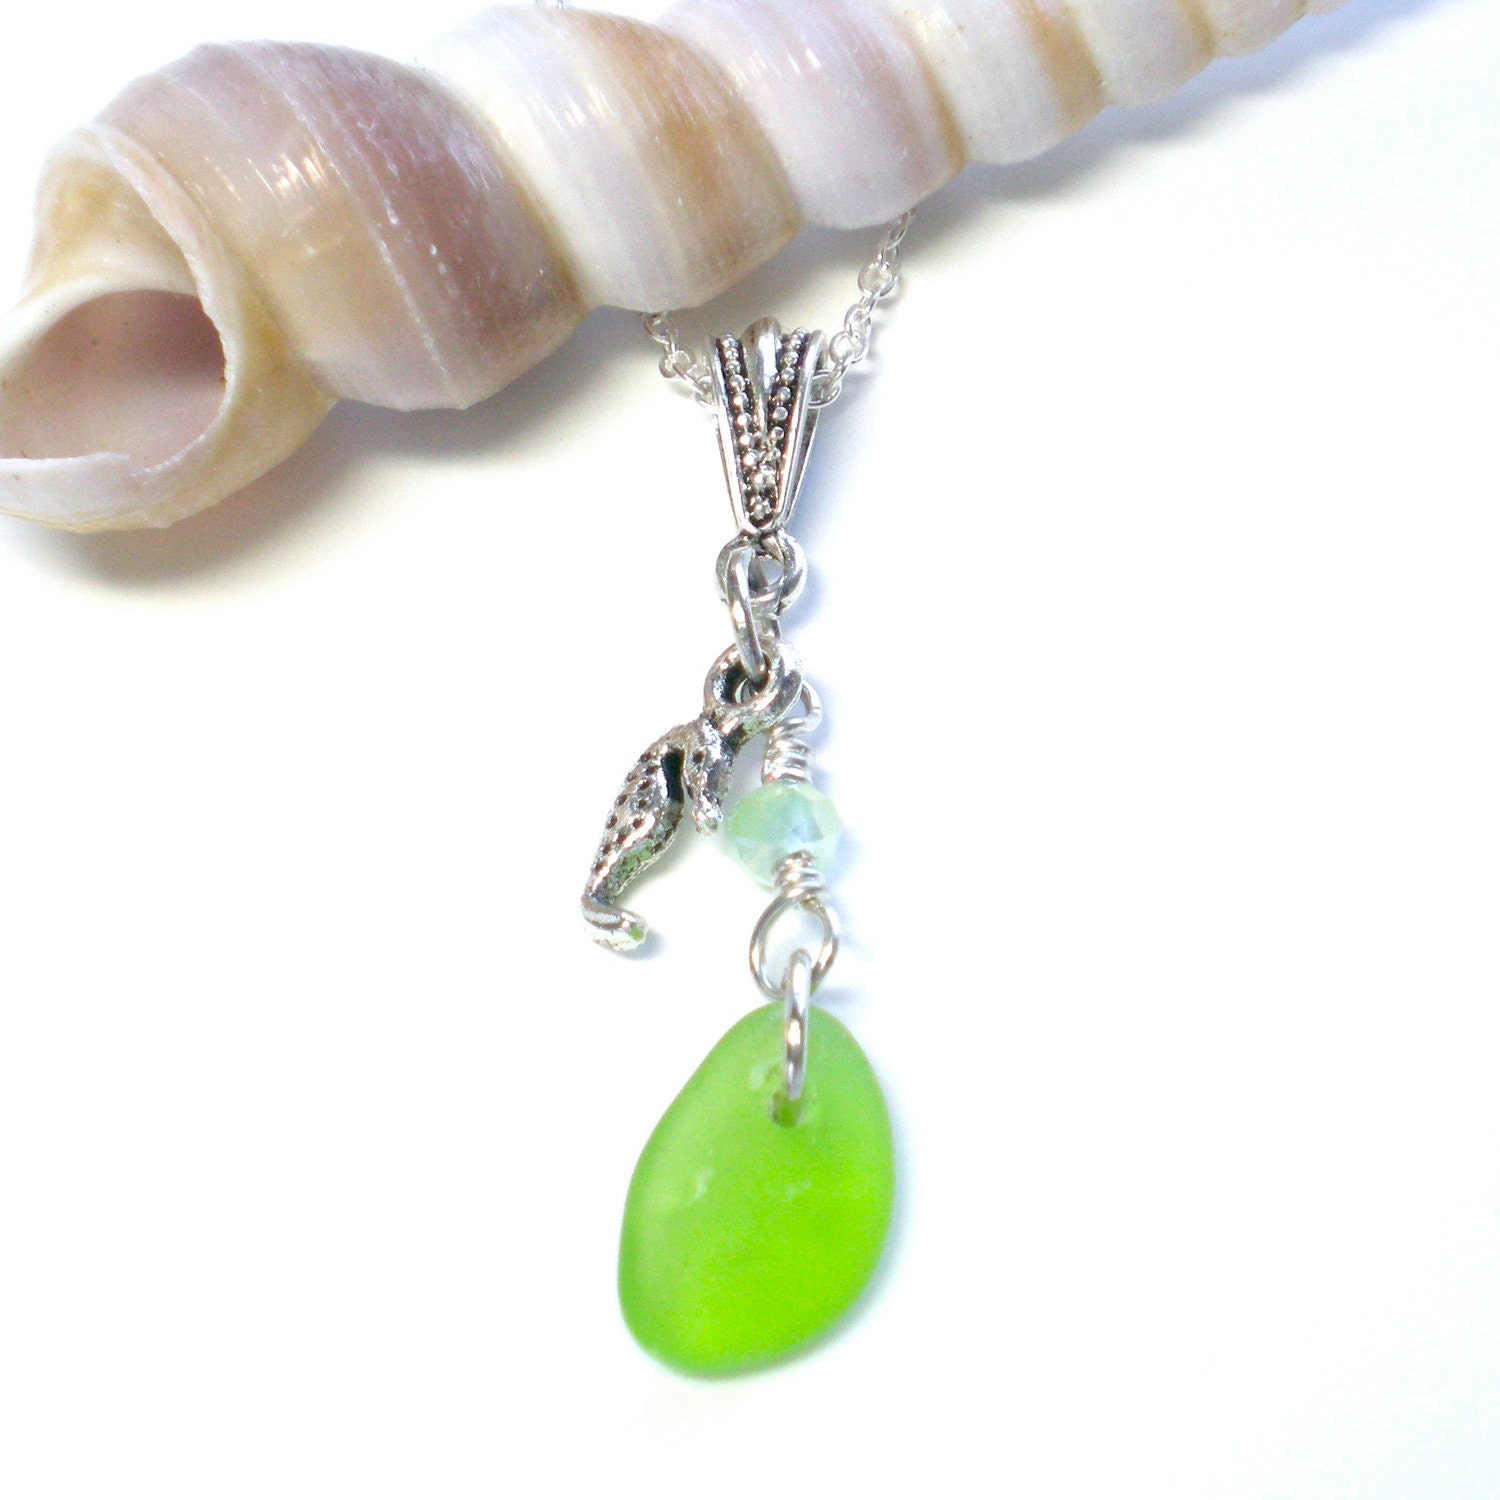 Sea Glass Necklace, Green Beach Glass Necklace, Seahorse Necklace, Seaglass Jewelry - SurfSeaGlass